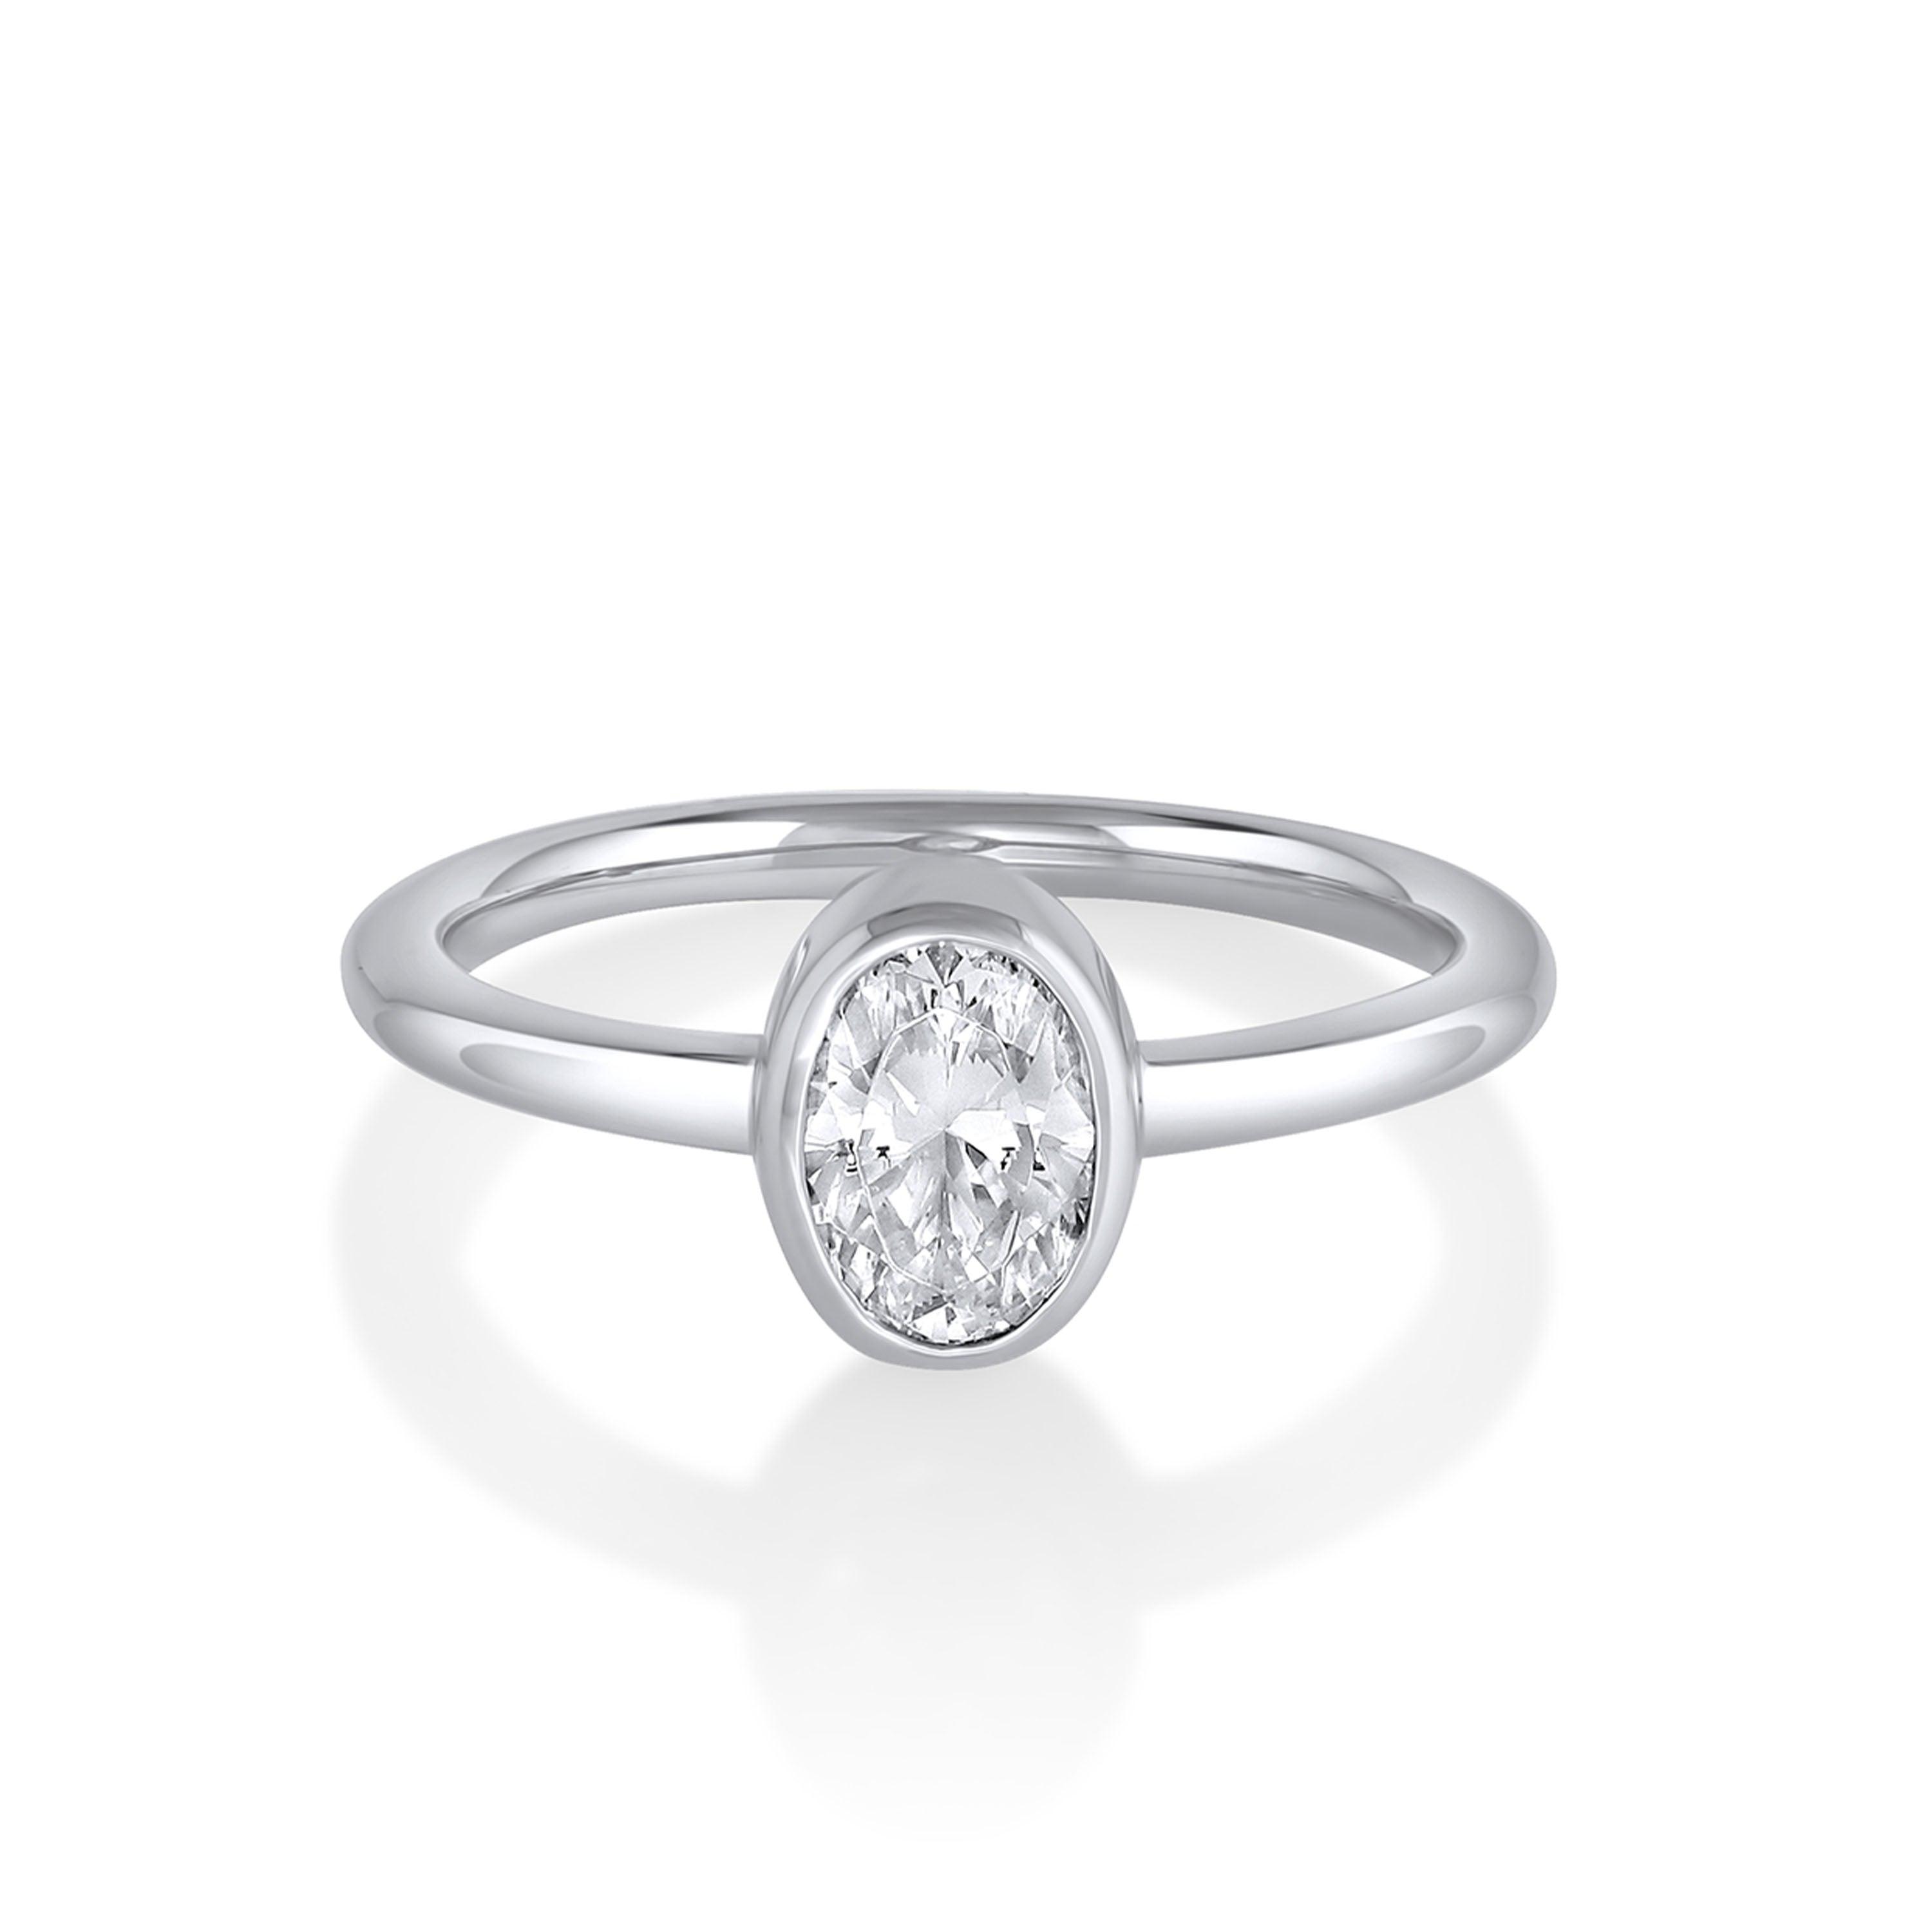 Marrow Fine Jewelry White Diamond Solitaire Brushed Metal Finish Engagement Ring